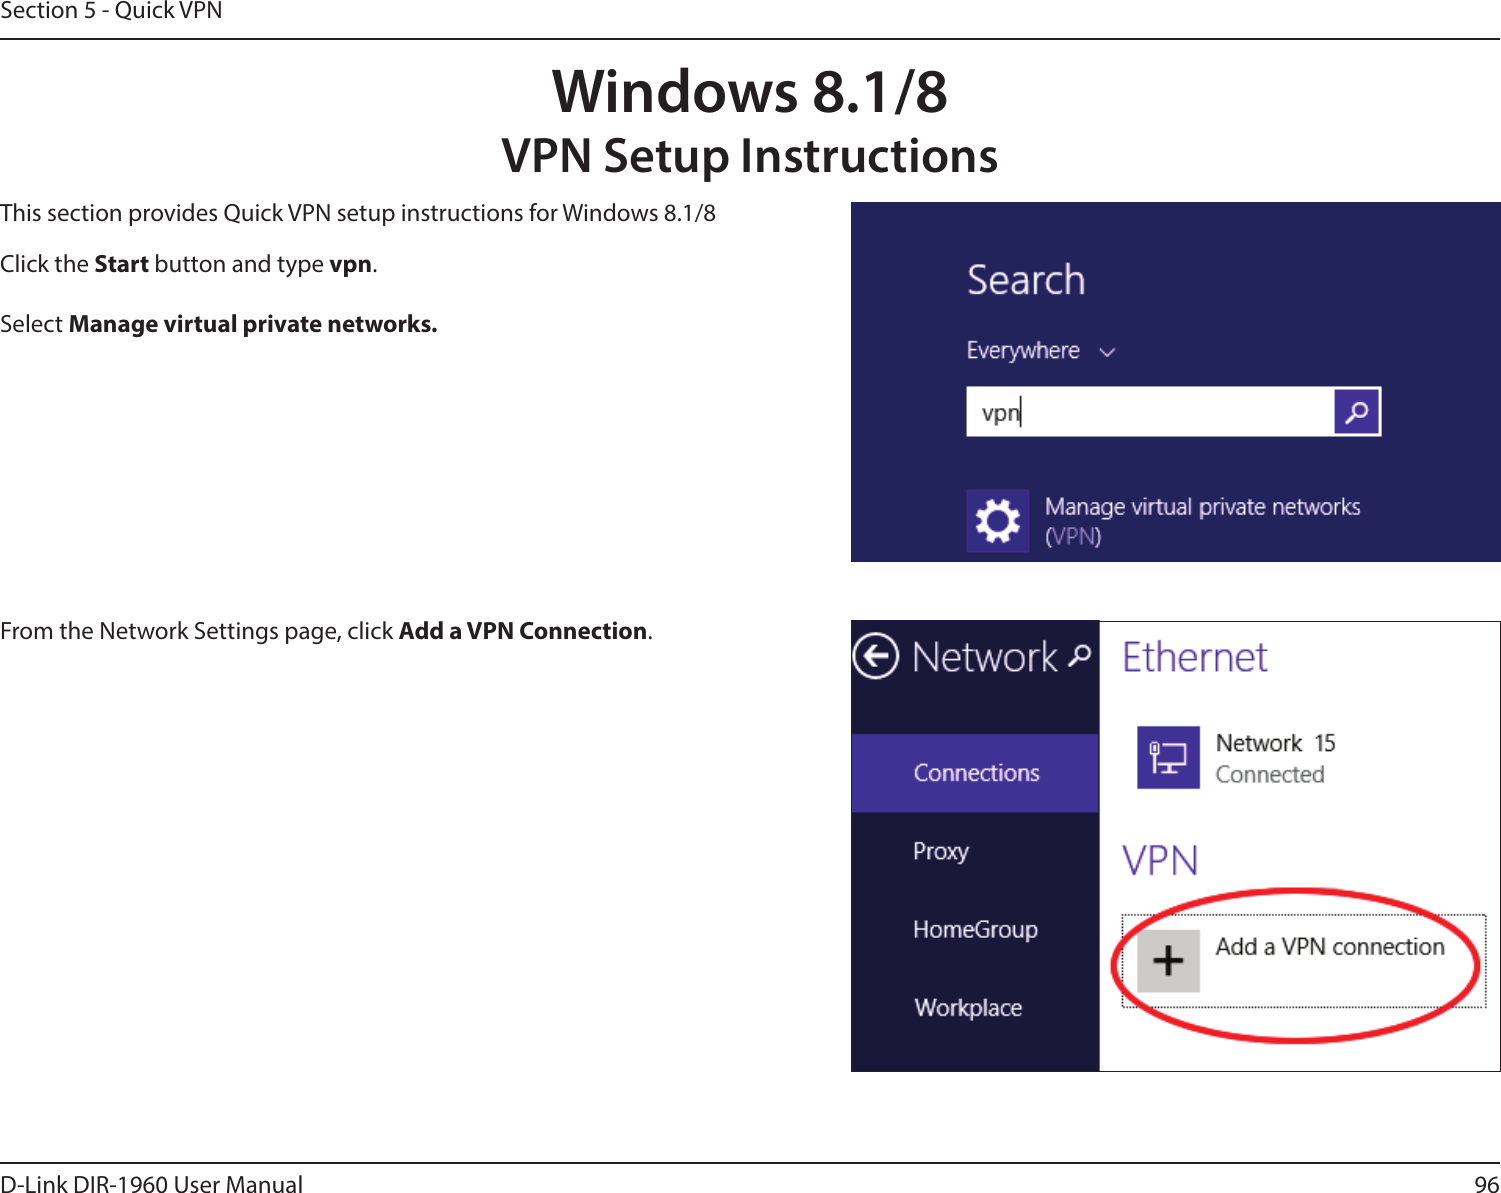 96D-Link DIR-1960 User ManualSection 5 - Quick VPNWindows 8.1/8VPN Setup InstructionsThis section provides Quick VPN setup instructions for Windows 8.1/8Click the Start button and type vpn. Select Manage virtual private networks.From the Network Settings page, click Add a VPN Connection.